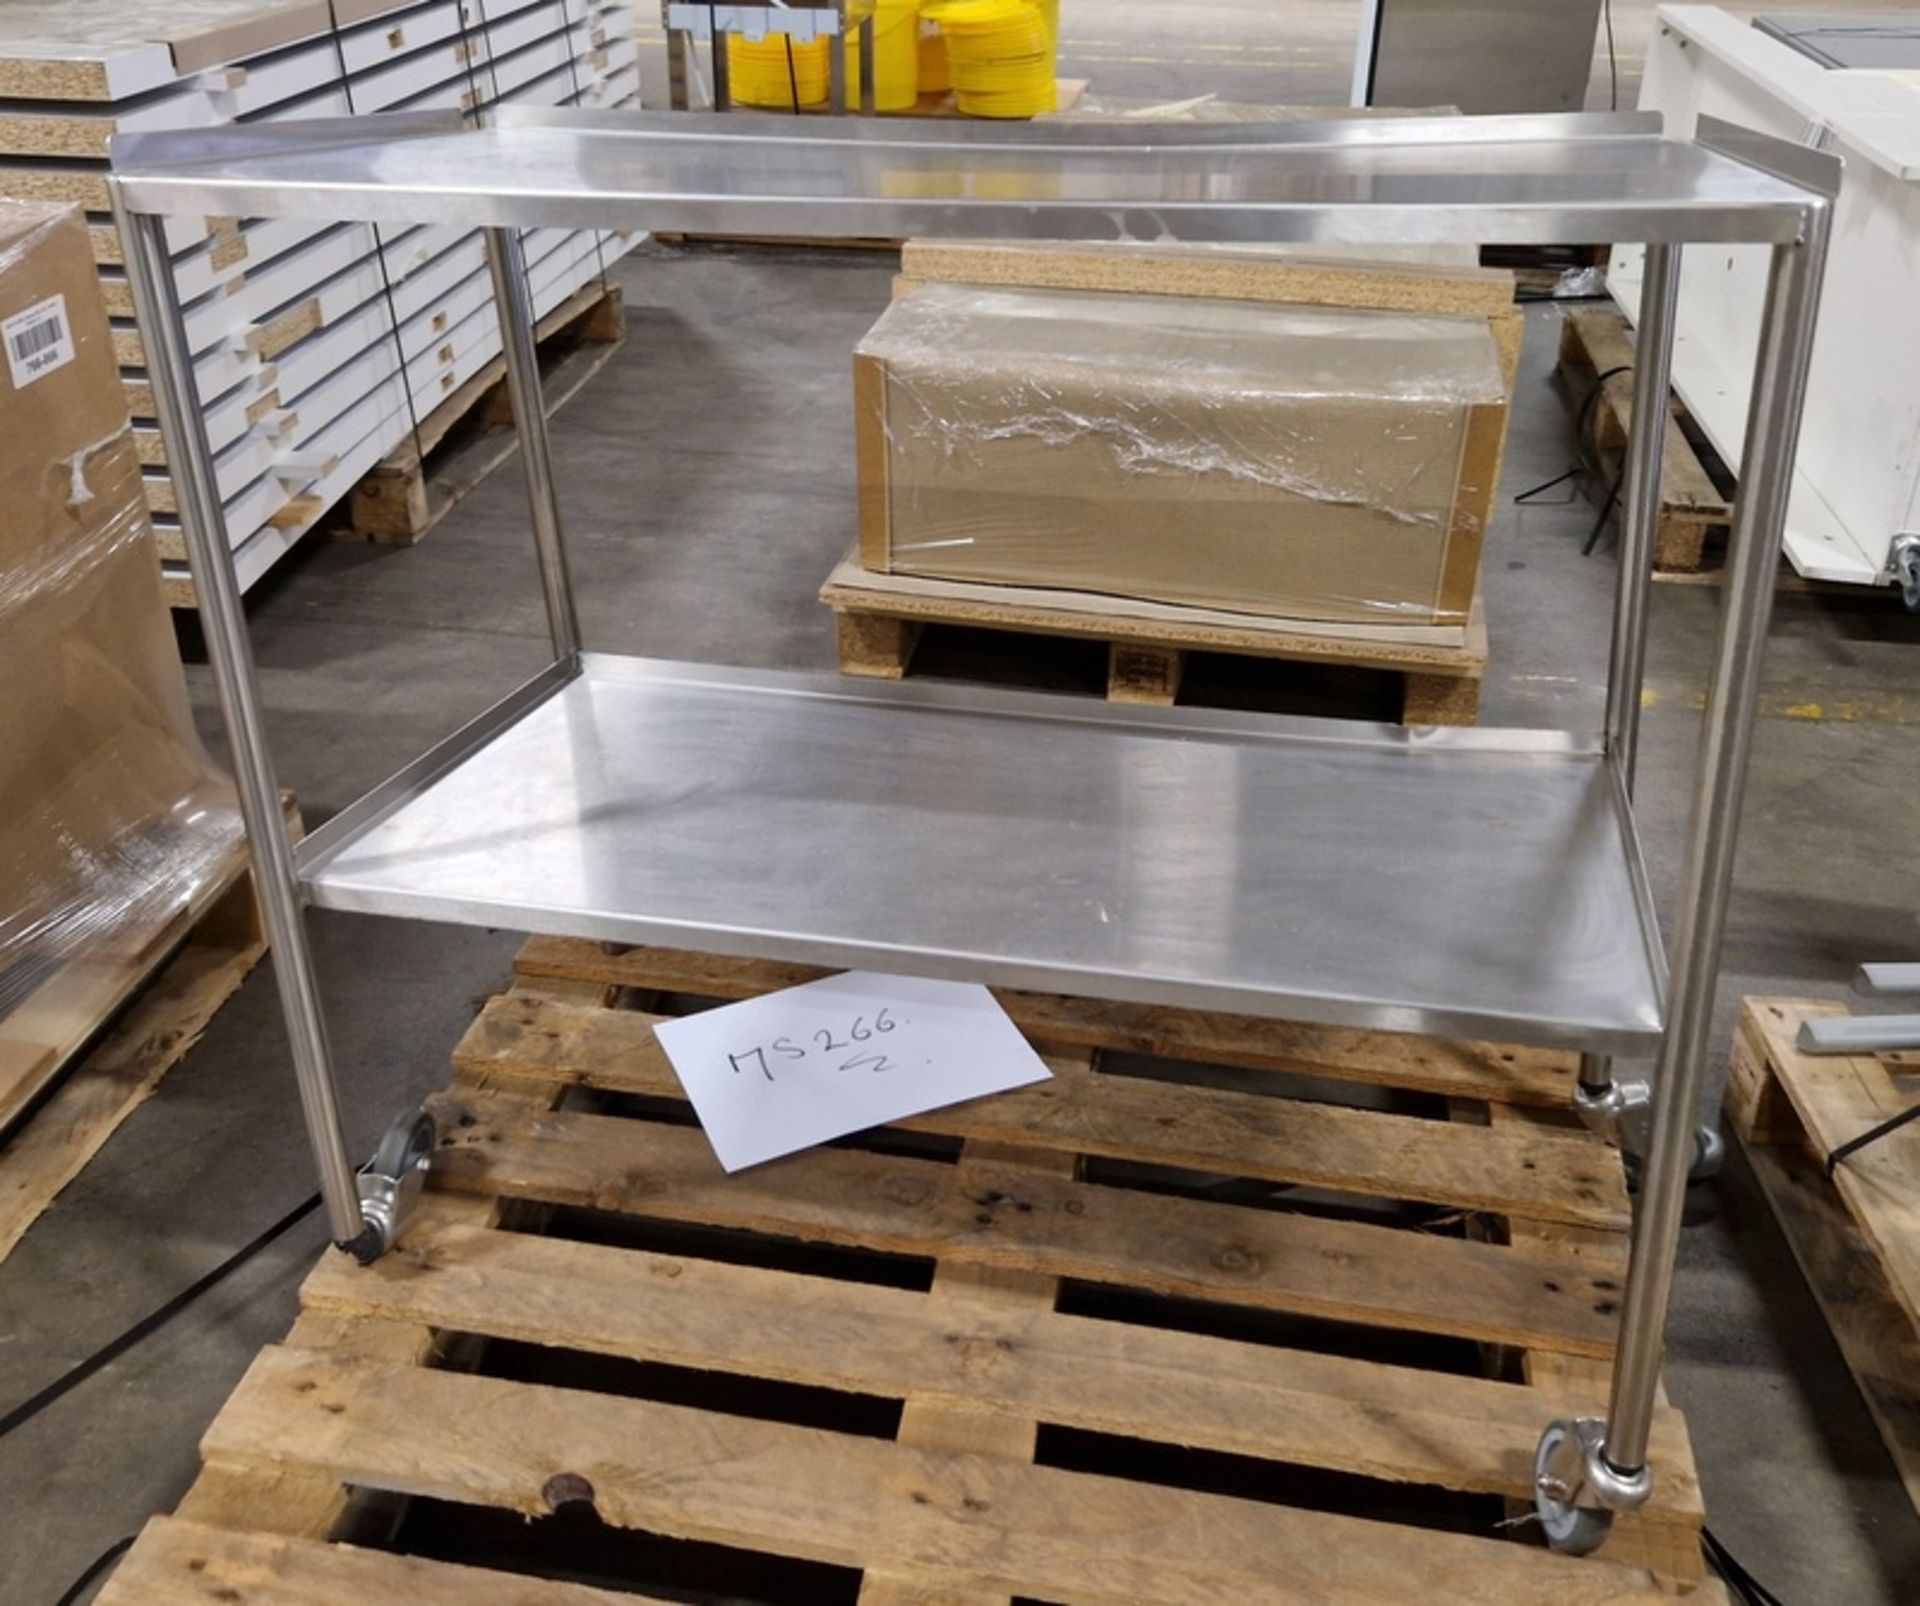 Approx 950 pallet spaces of medical equipment & supplies – itemised list in the description - Image 39 of 102